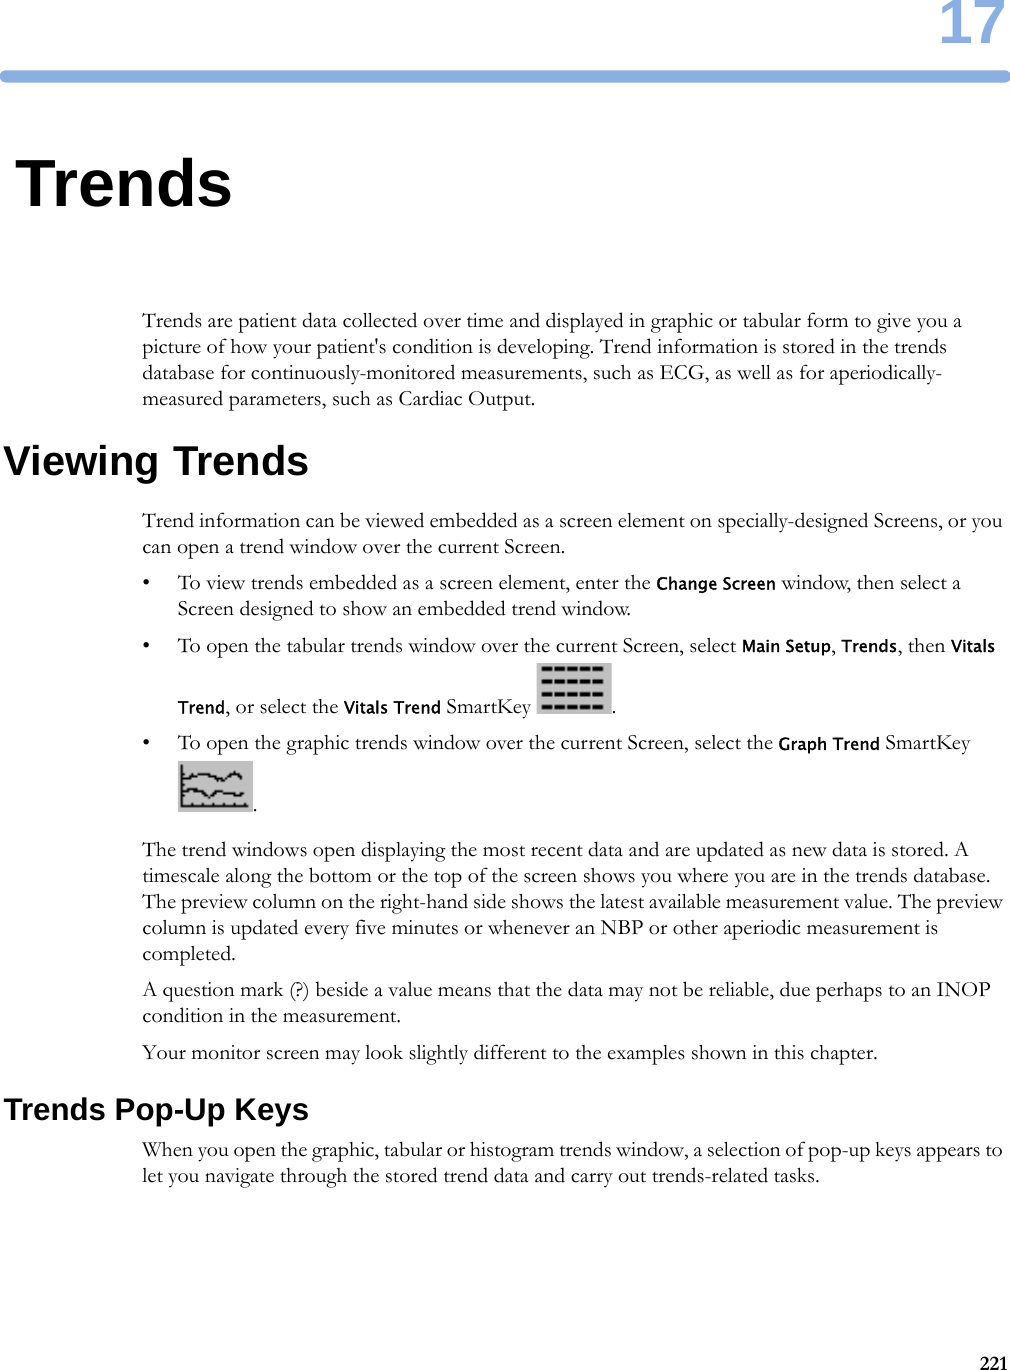 1722117TrendsTrends are patient data collected over time and displayed in graphic or tabular form to give you a picture of how your patient&apos;s condition is developing. Trend information is stored in the trends database for continuously-monitored measurements, such as ECG, as well as for aperiodically-measured parameters, such as Cardiac Output.Viewing TrendsTrend information can be viewed embedded as a screen element on specially-designed Screens, or you can open a trend window over the current Screen.• To view trends embedded as a screen element, enter the Change Screen window, then select a Screen designed to show an embedded trend window.• To open the tabular trends window over the current Screen, select Main Setup, Trends, then Vitals Trend, or select the Vitals Trend SmartKey  .• To open the graphic trends window over the current Screen, select the Graph Trend SmartKey .The trend windows open displaying the most recent data and are updated as new data is stored. A timescale along the bottom or the top of the screen shows you where you are in the trends database. The preview column on the right-hand side shows the latest available measurement value. The preview column is updated every five minutes or whenever an NBP or other aperiodic measurement is completed.A question mark (?) beside a value means that the data may not be reliable, due perhaps to an INOP condition in the measurement.Your monitor screen may look slightly different to the examples shown in this chapter.Trends Pop-Up KeysWhen you open the graphic, tabular or histogram trends window, a selection of pop-up keys appears to let you navigate through the stored trend data and carry out trends-related tasks.